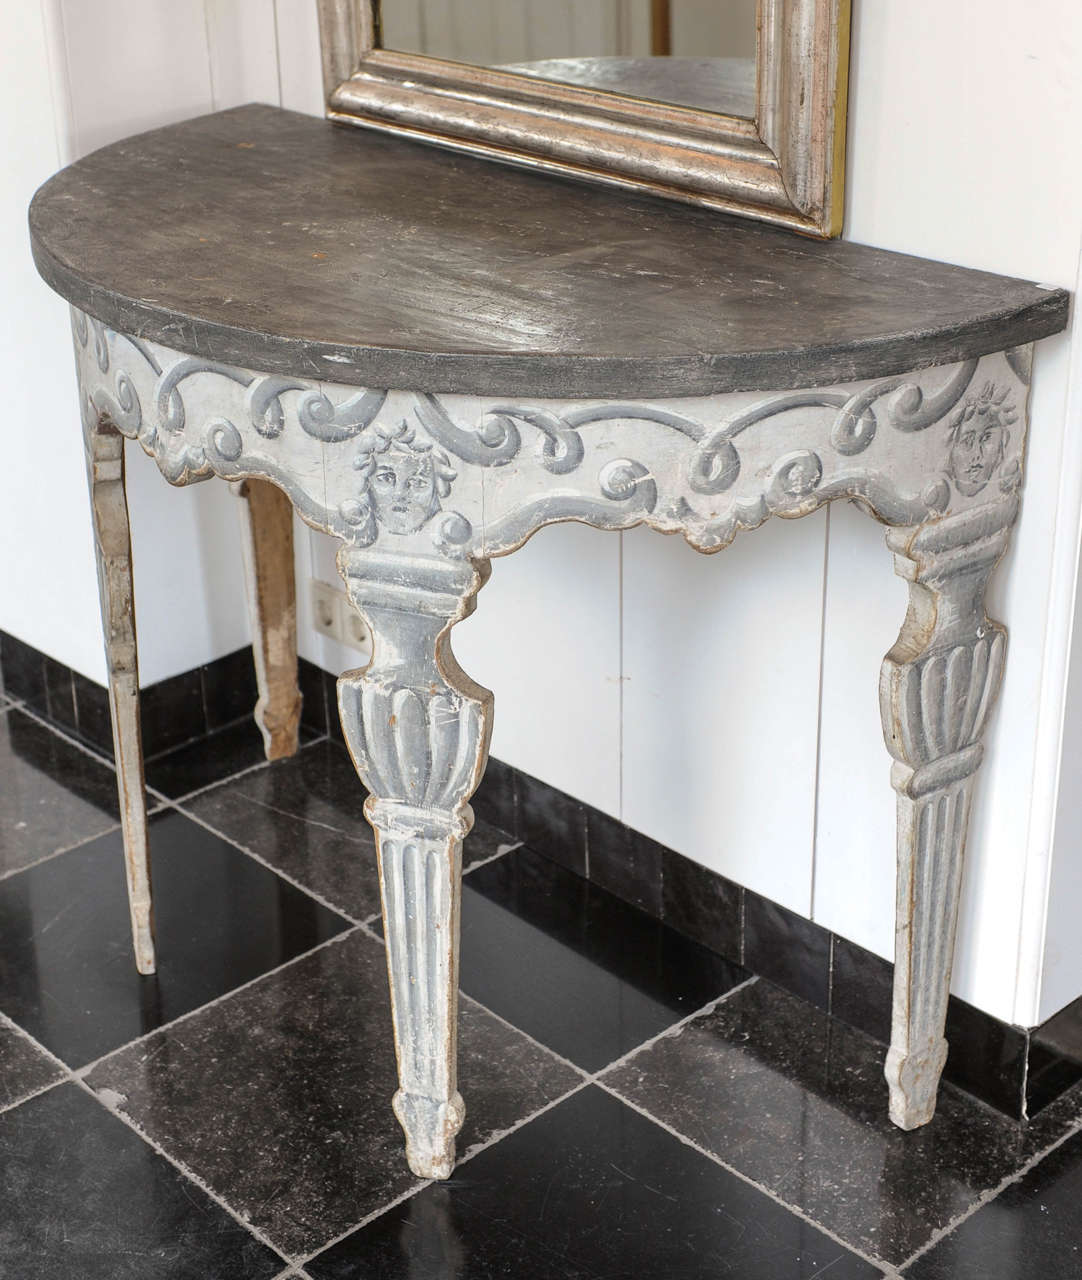 Antique Italian neoclassical demilune side table from circa 1800, with grey painted decorations added at a later date.

Measures: Height 90 cm x width 120 cm x depth 59.5 cm.